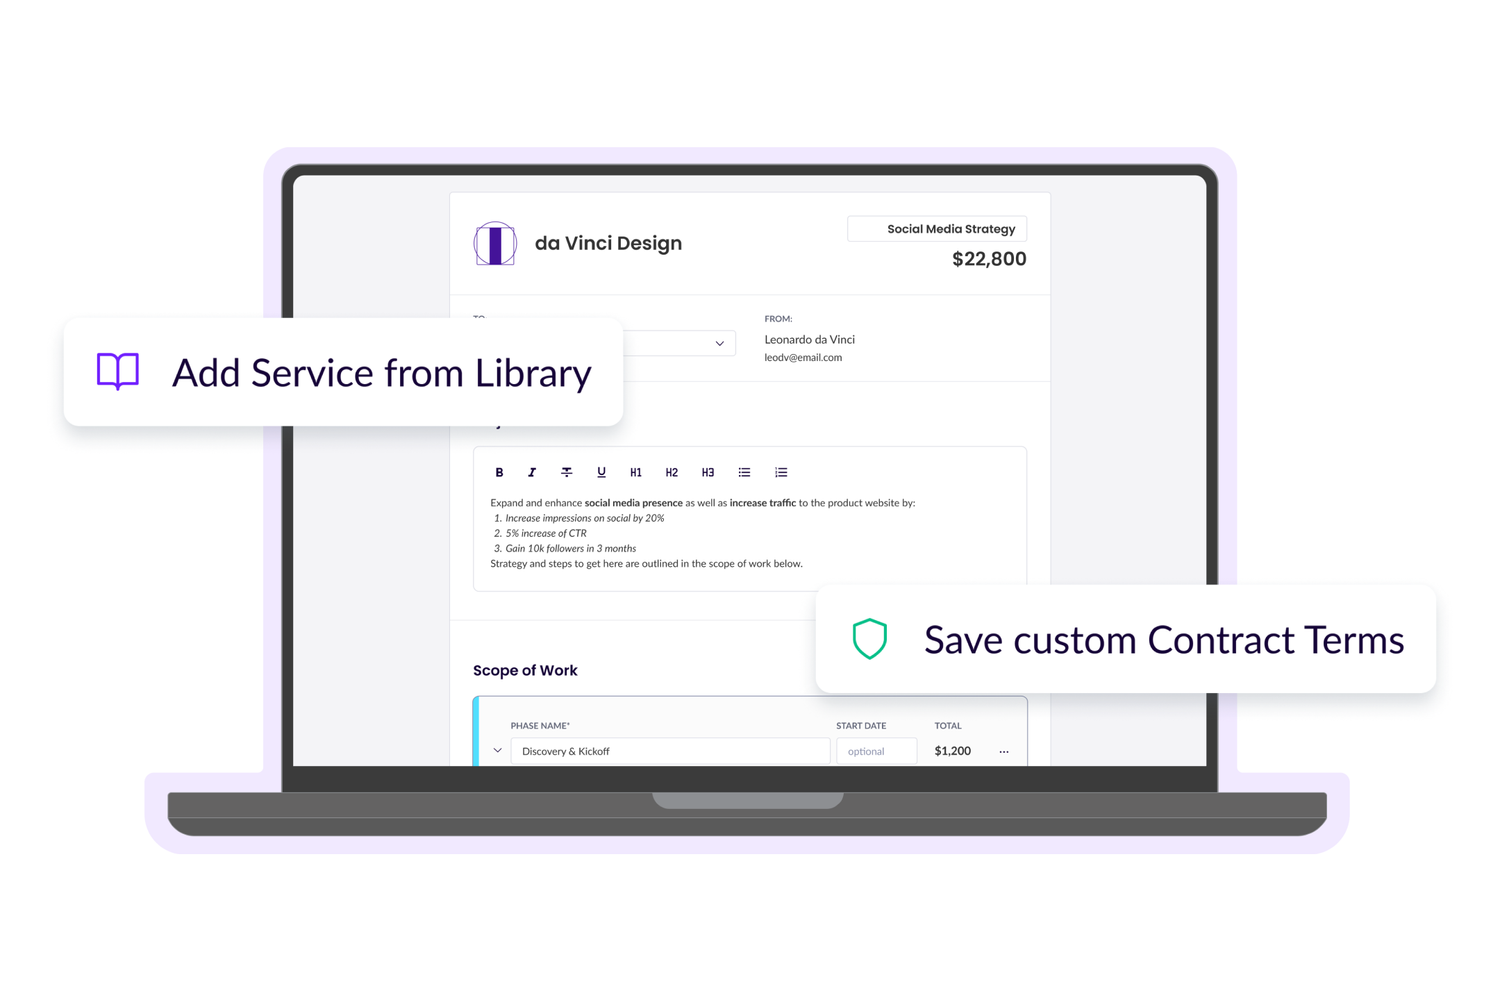 Build out proposals in minutes on Wethos for any and all of your freelance projects. Proposals include project goals, scopes of work, and contract terms. Clients can sign and accept proposals easily so you can begin work quickly.